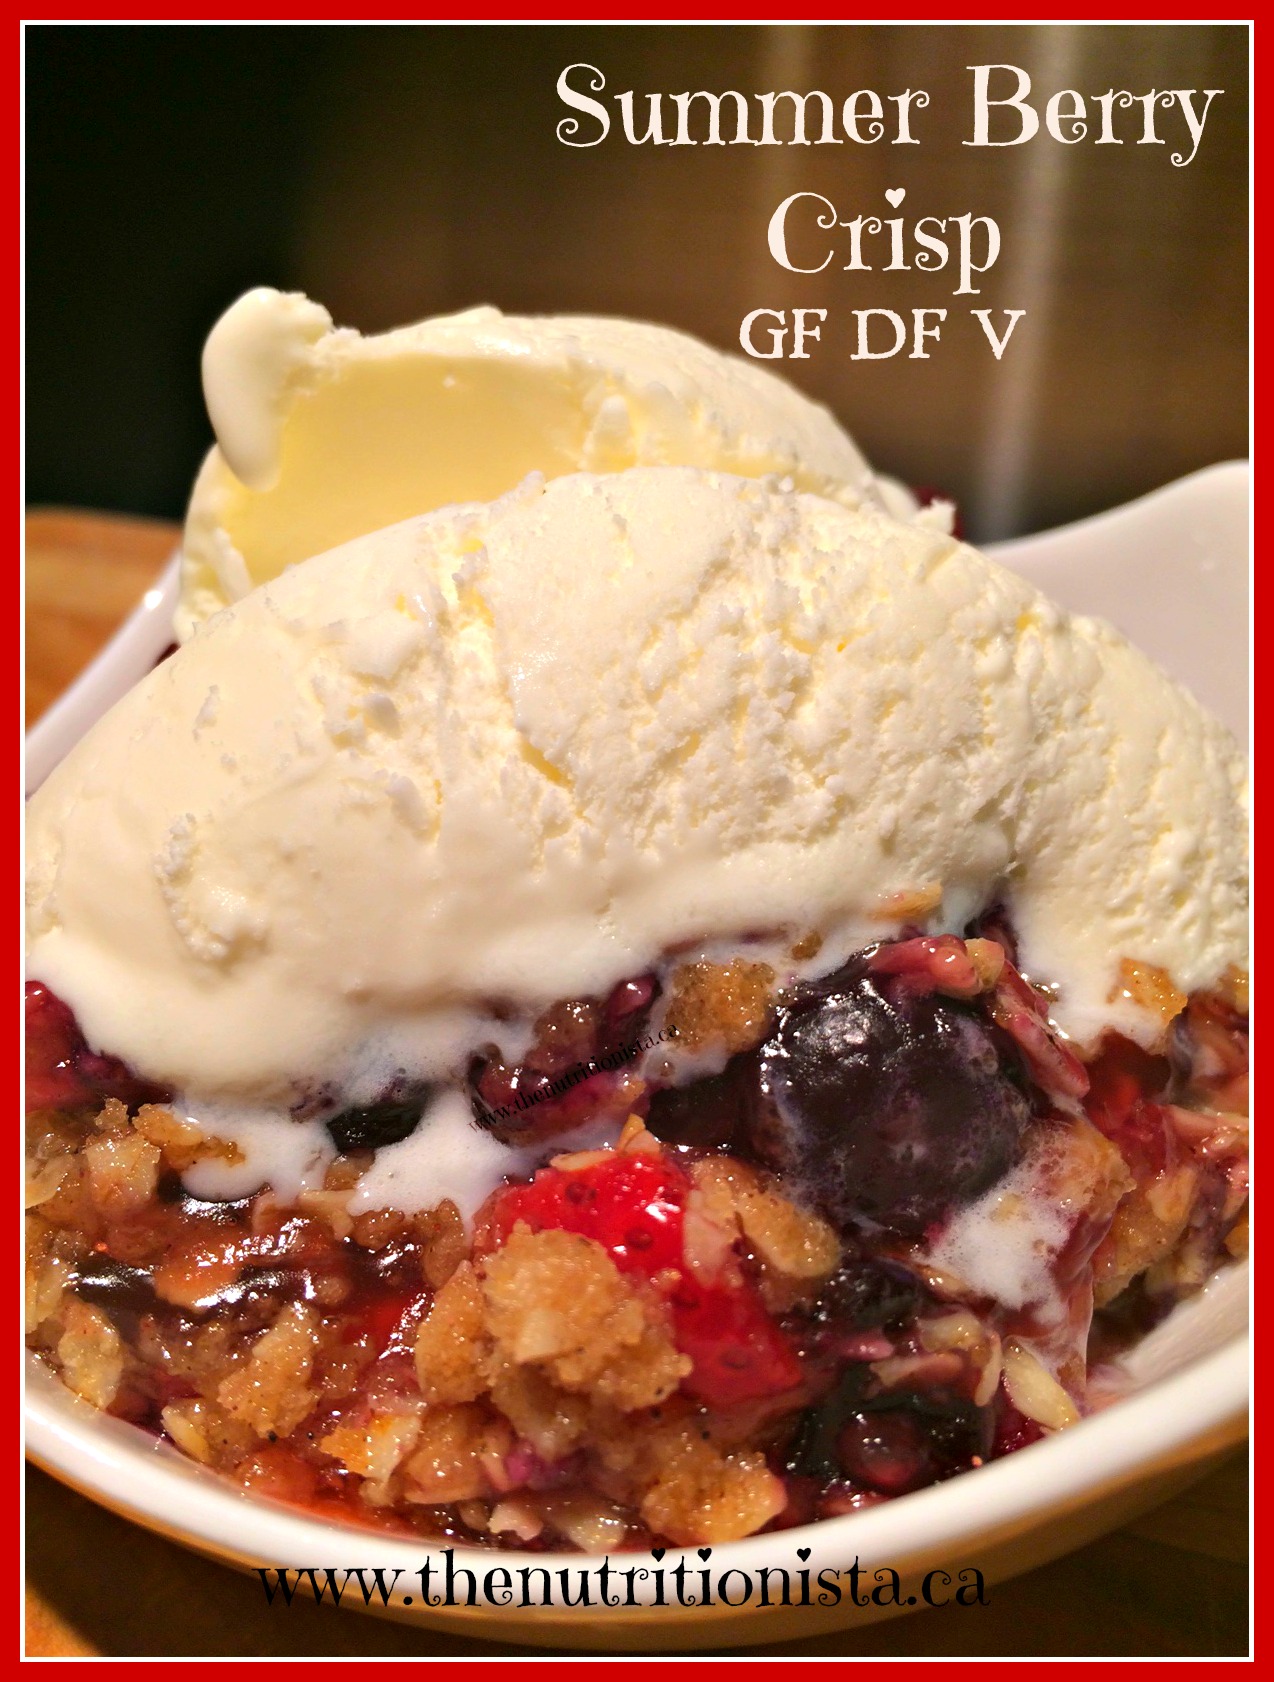 This gluten free berry crisp is the perfect sweet ending to your BBQ or summer dinner. Vegan adaptable. Via@bcnutritionista